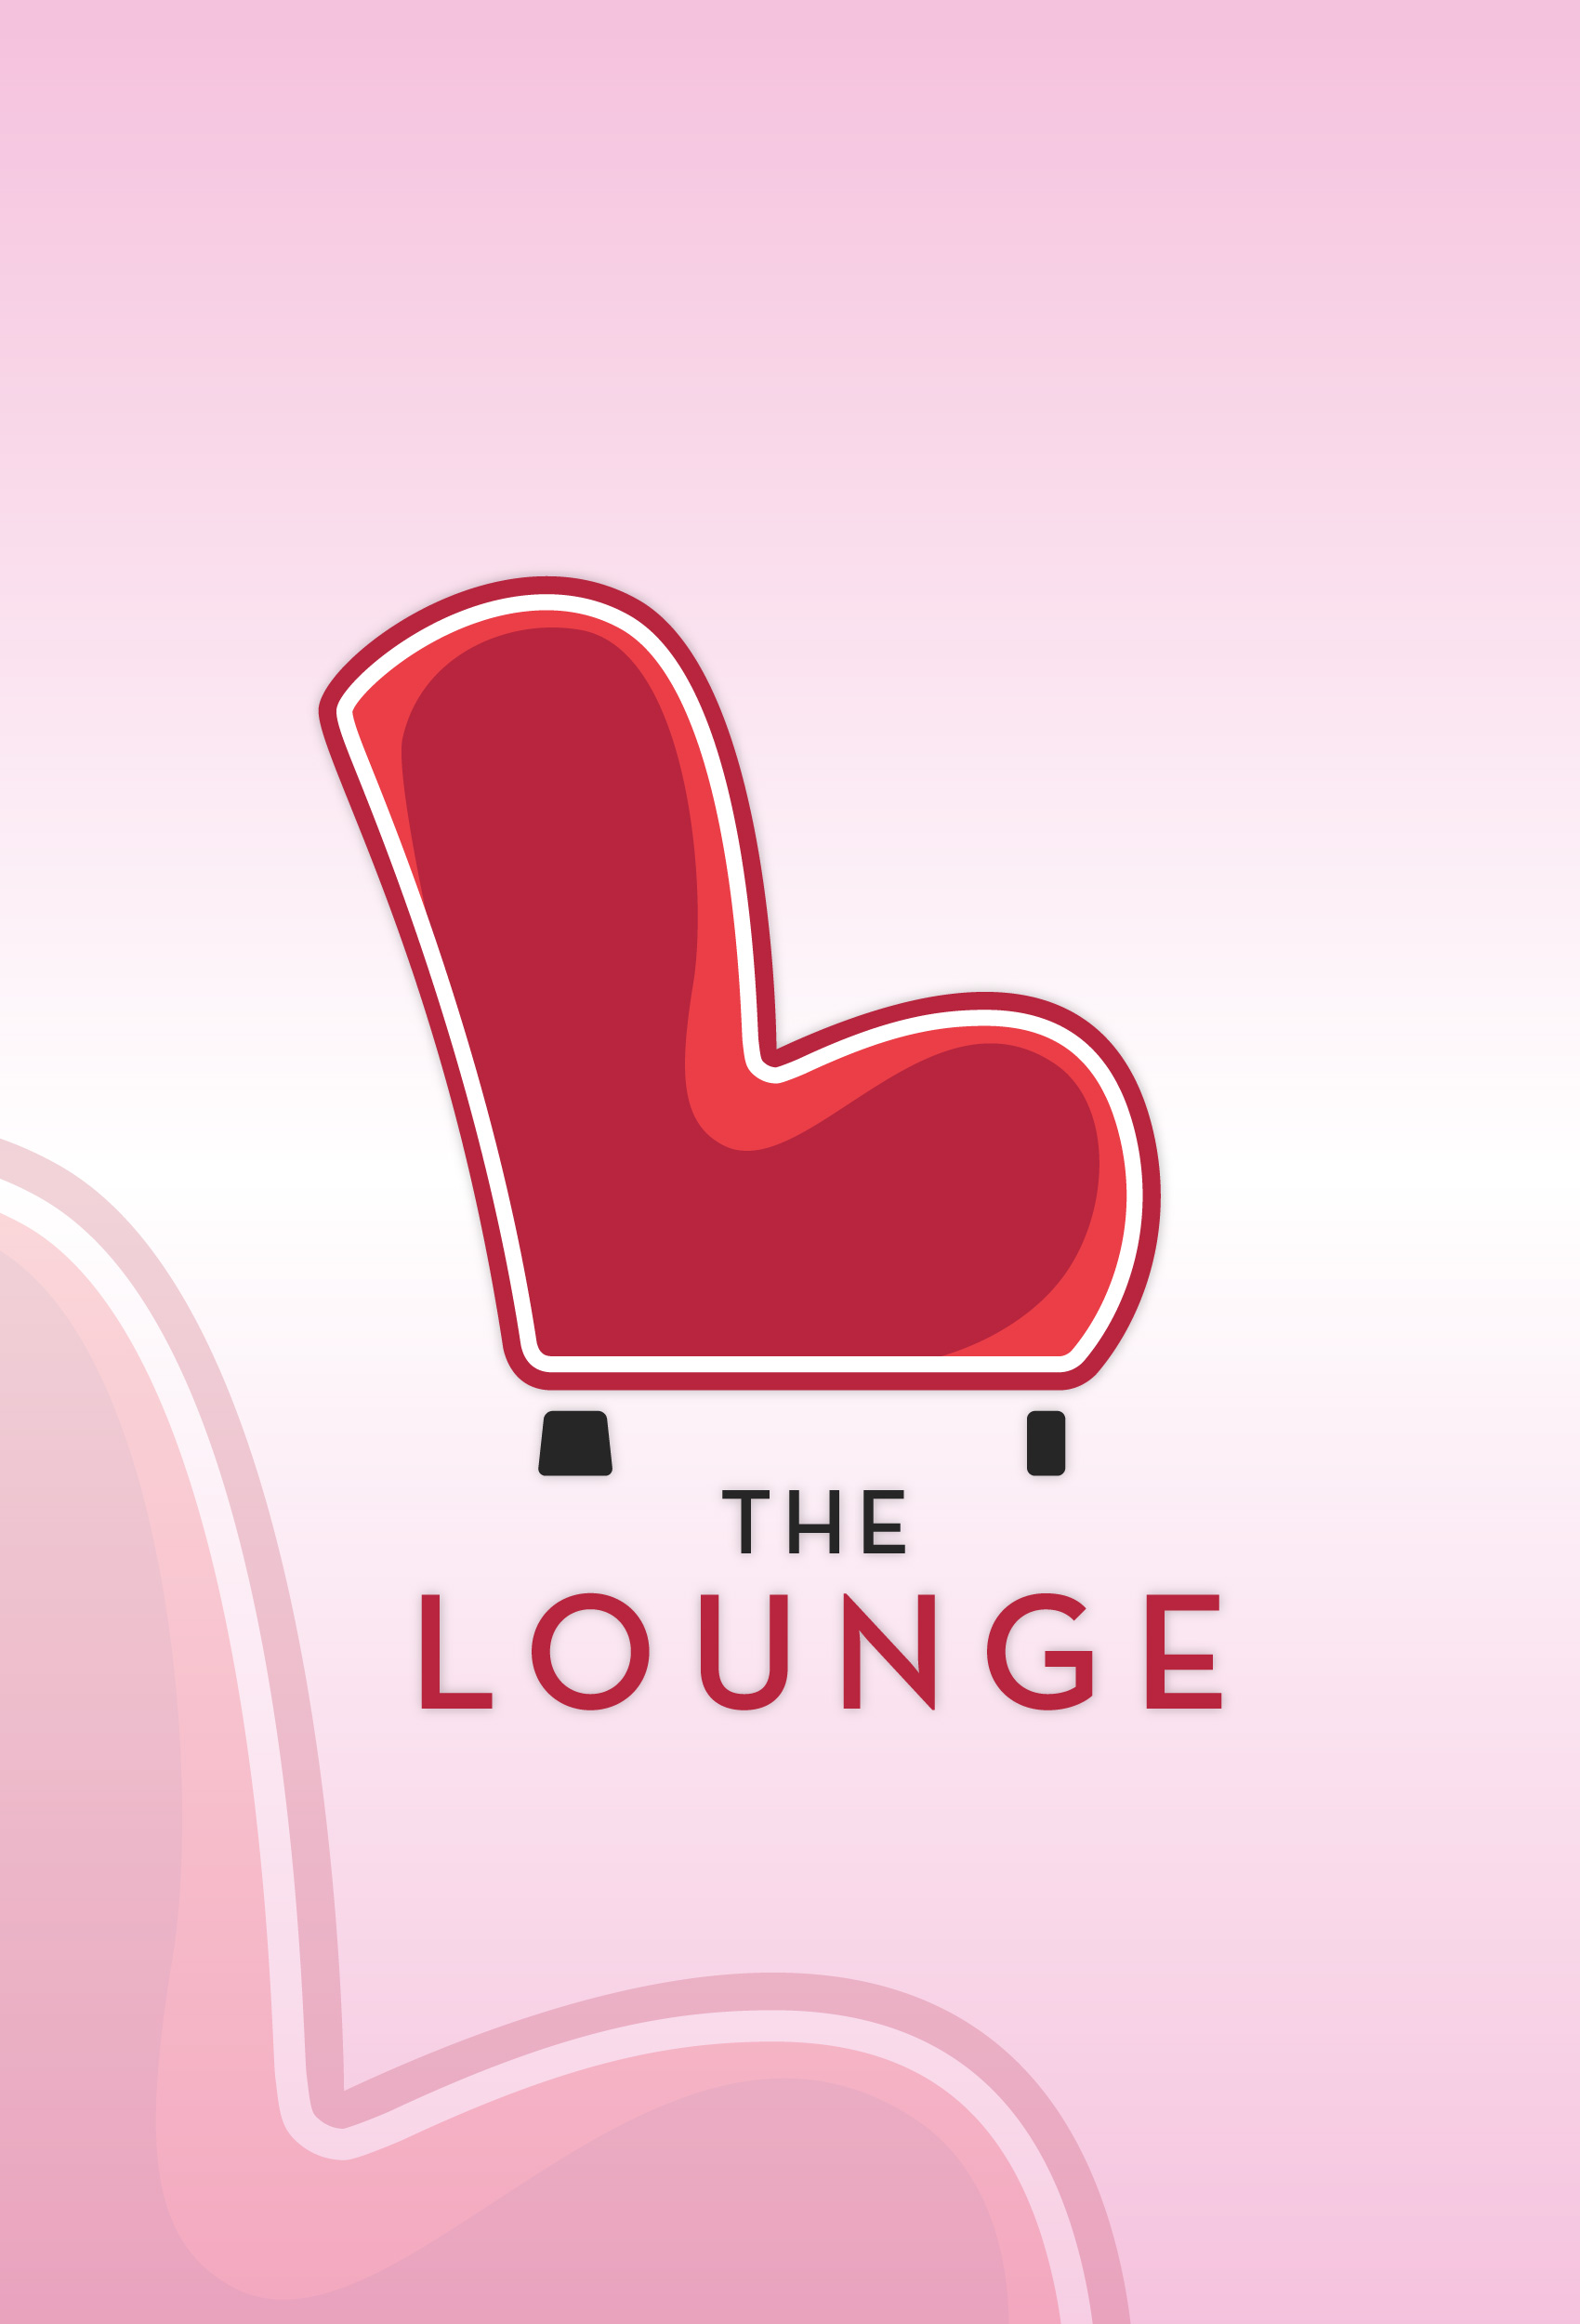 An image of The Lounge's branding